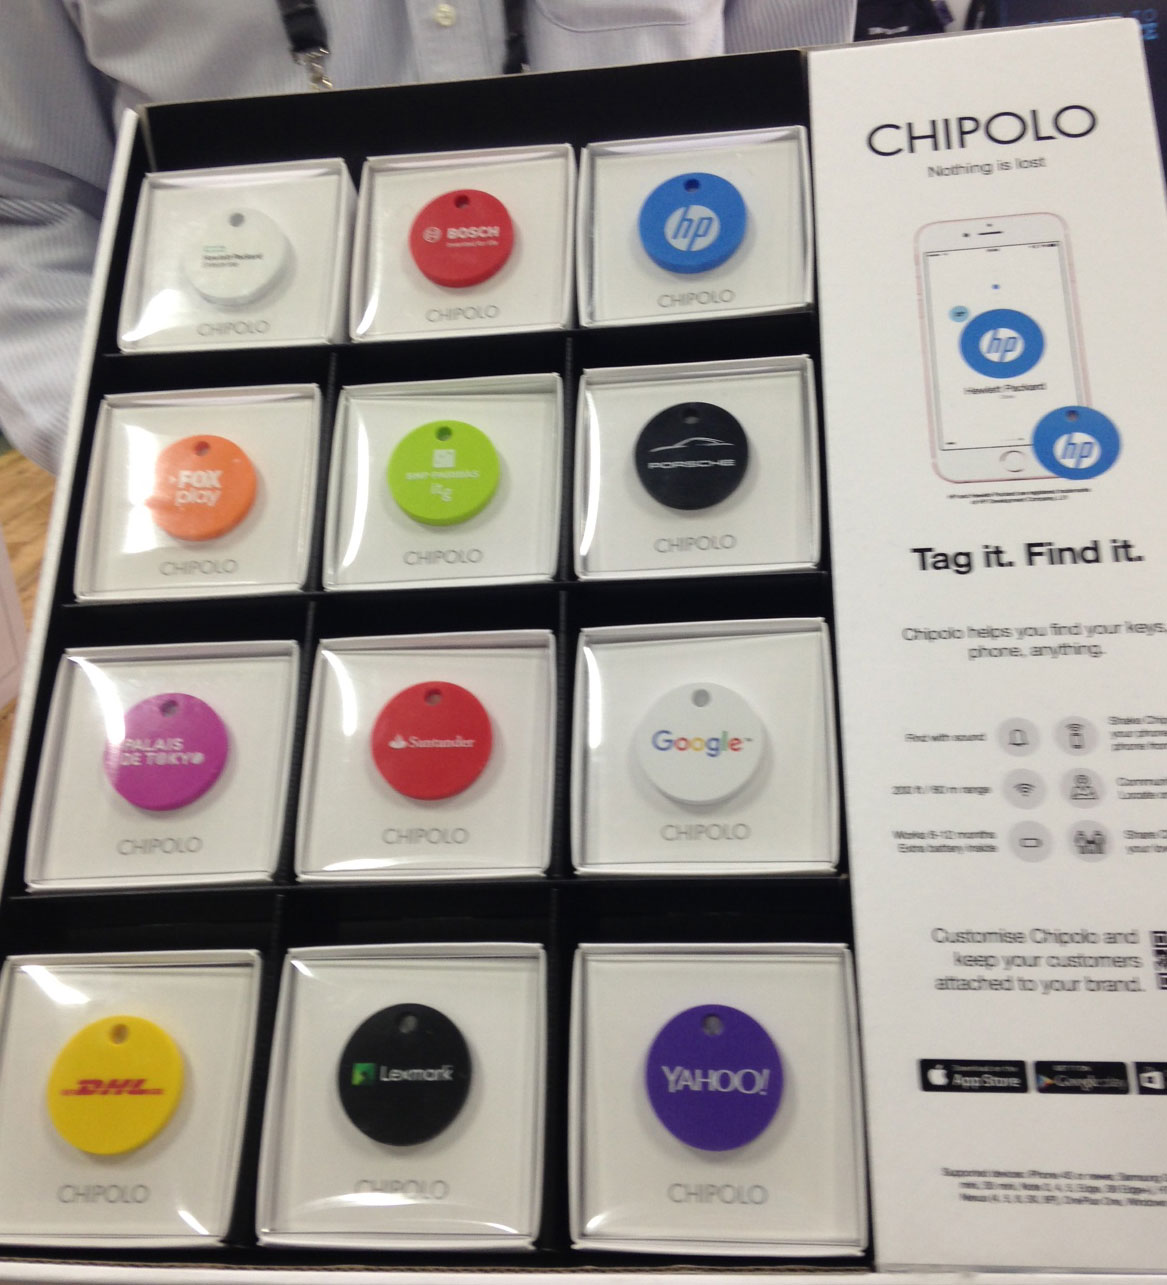 Chipolo bluetooth item finder